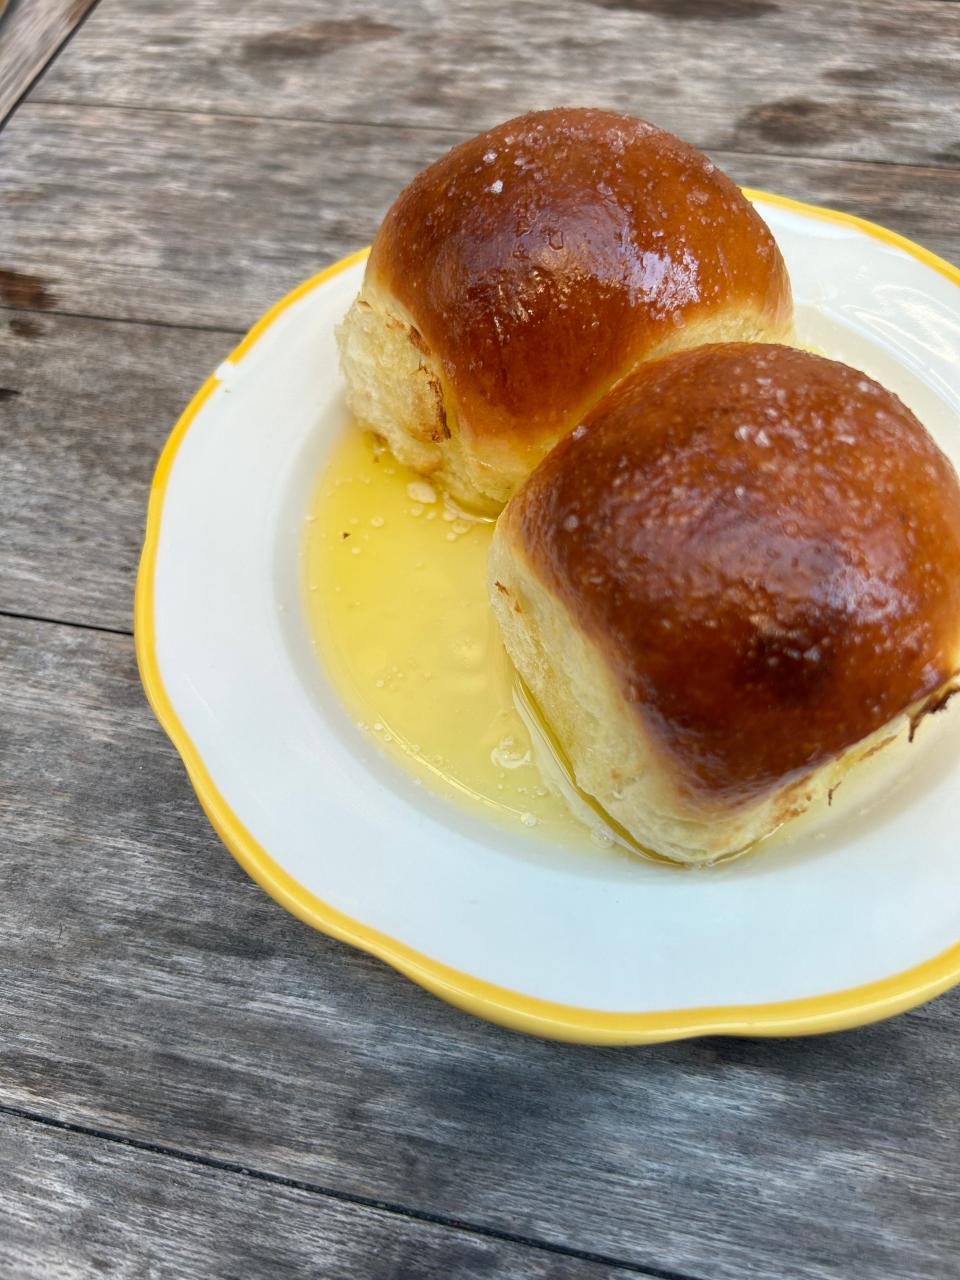 Perfectly buttery, slightly salty rolls at The Optimist.